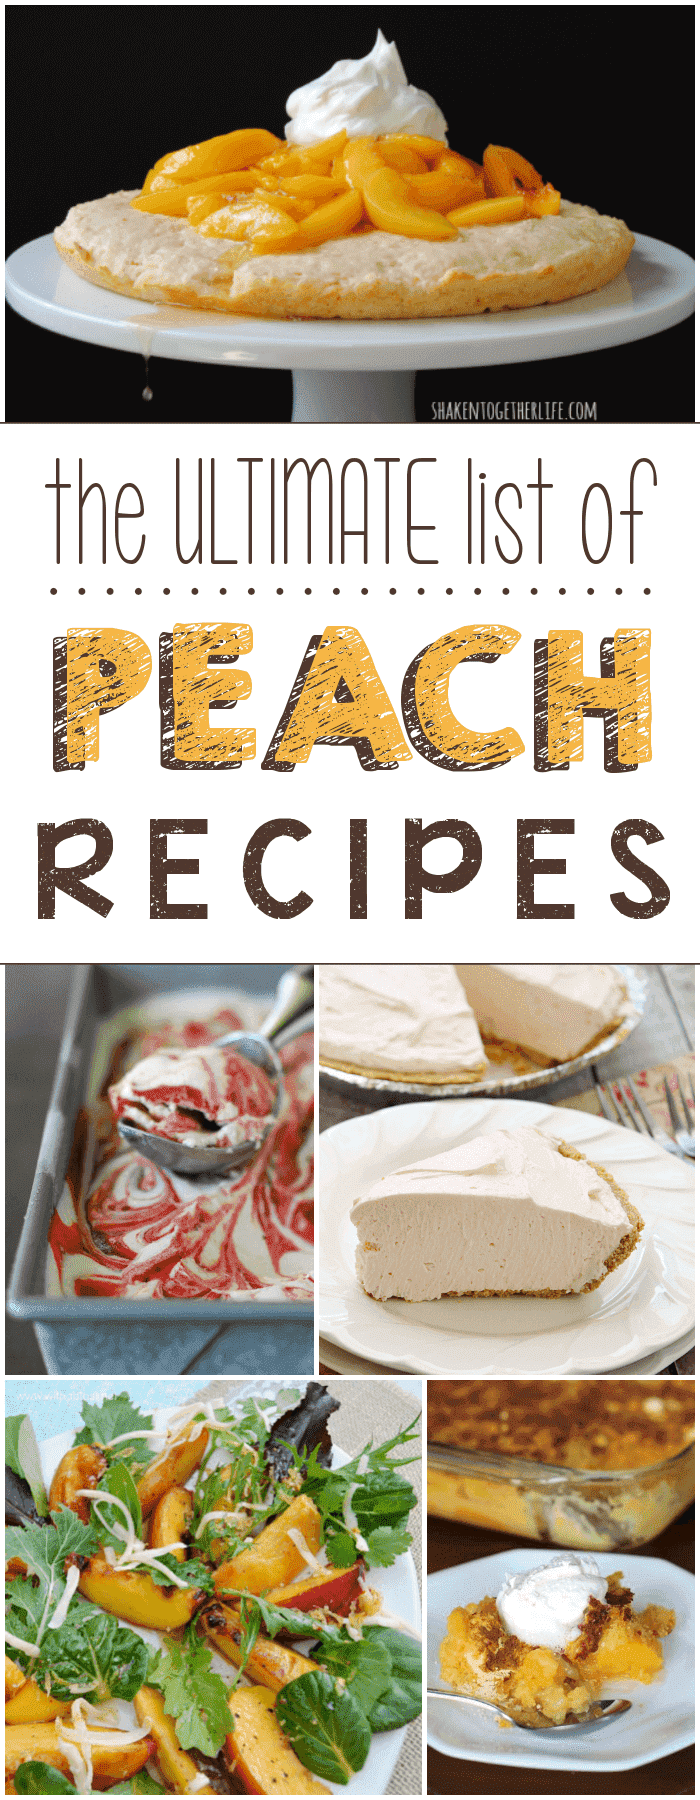 The ULTIMATE List of Peach Recipes collage.